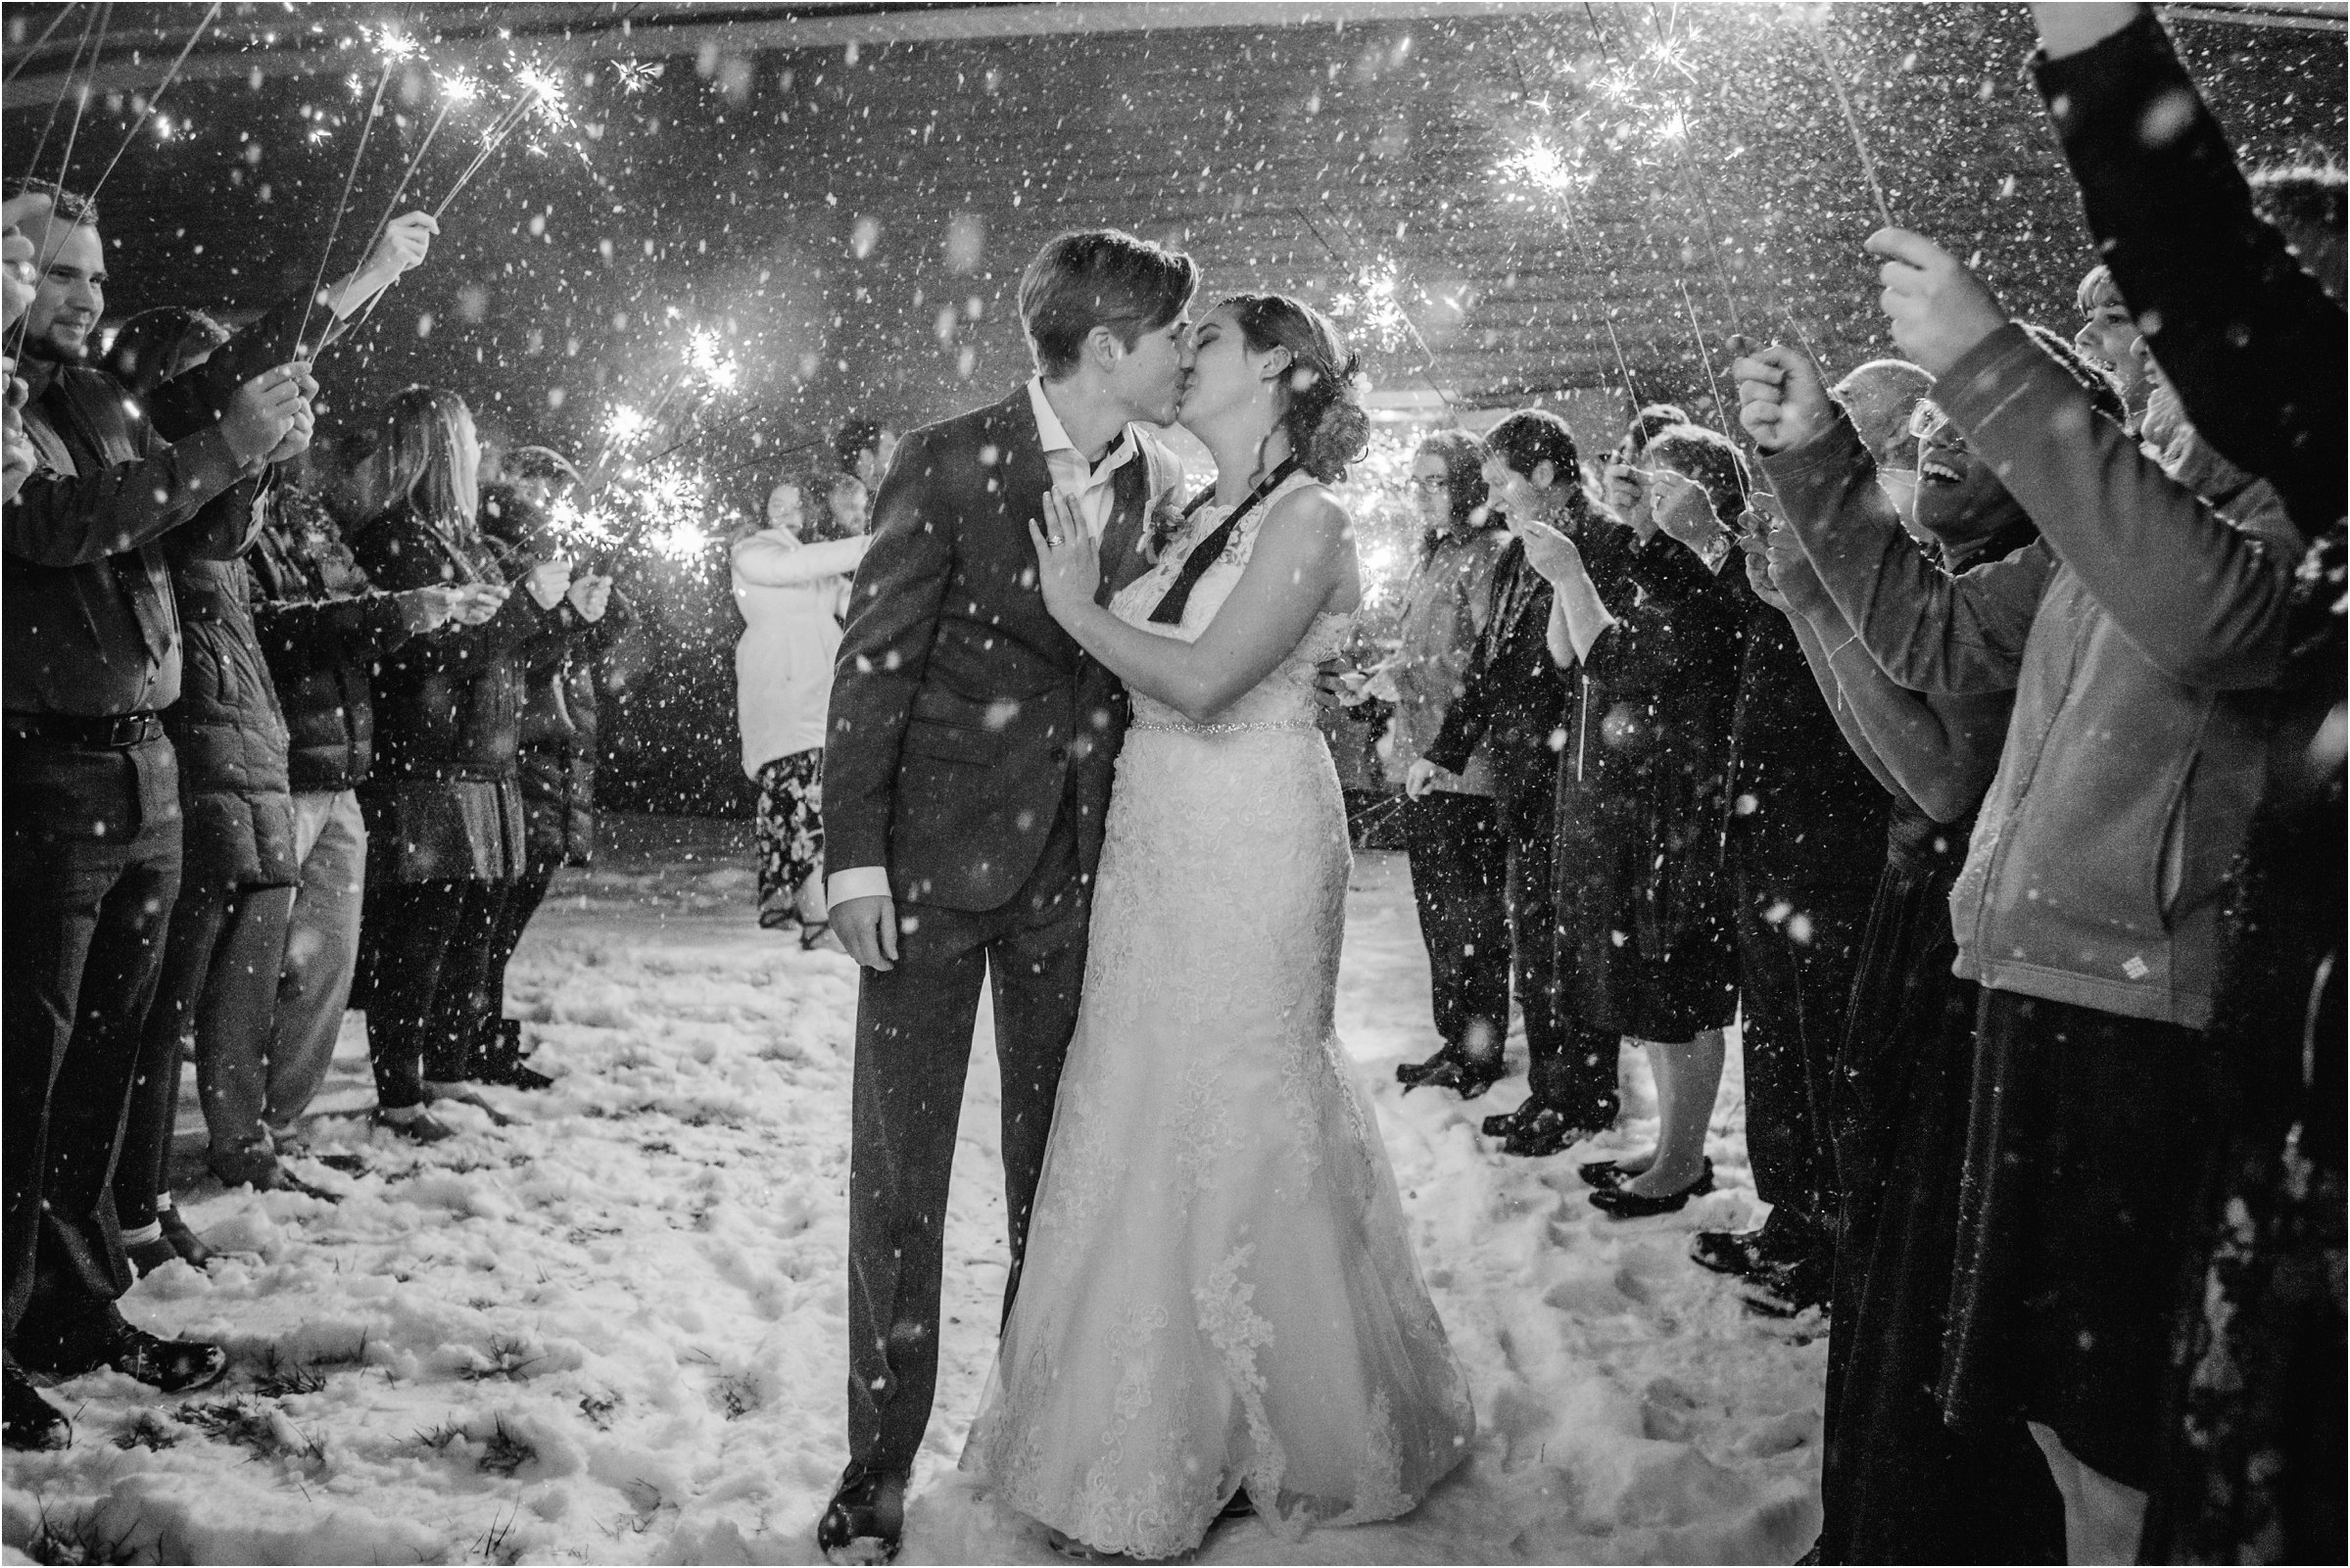 Bride and groom with sparklers above them as they head for a car in the night snow